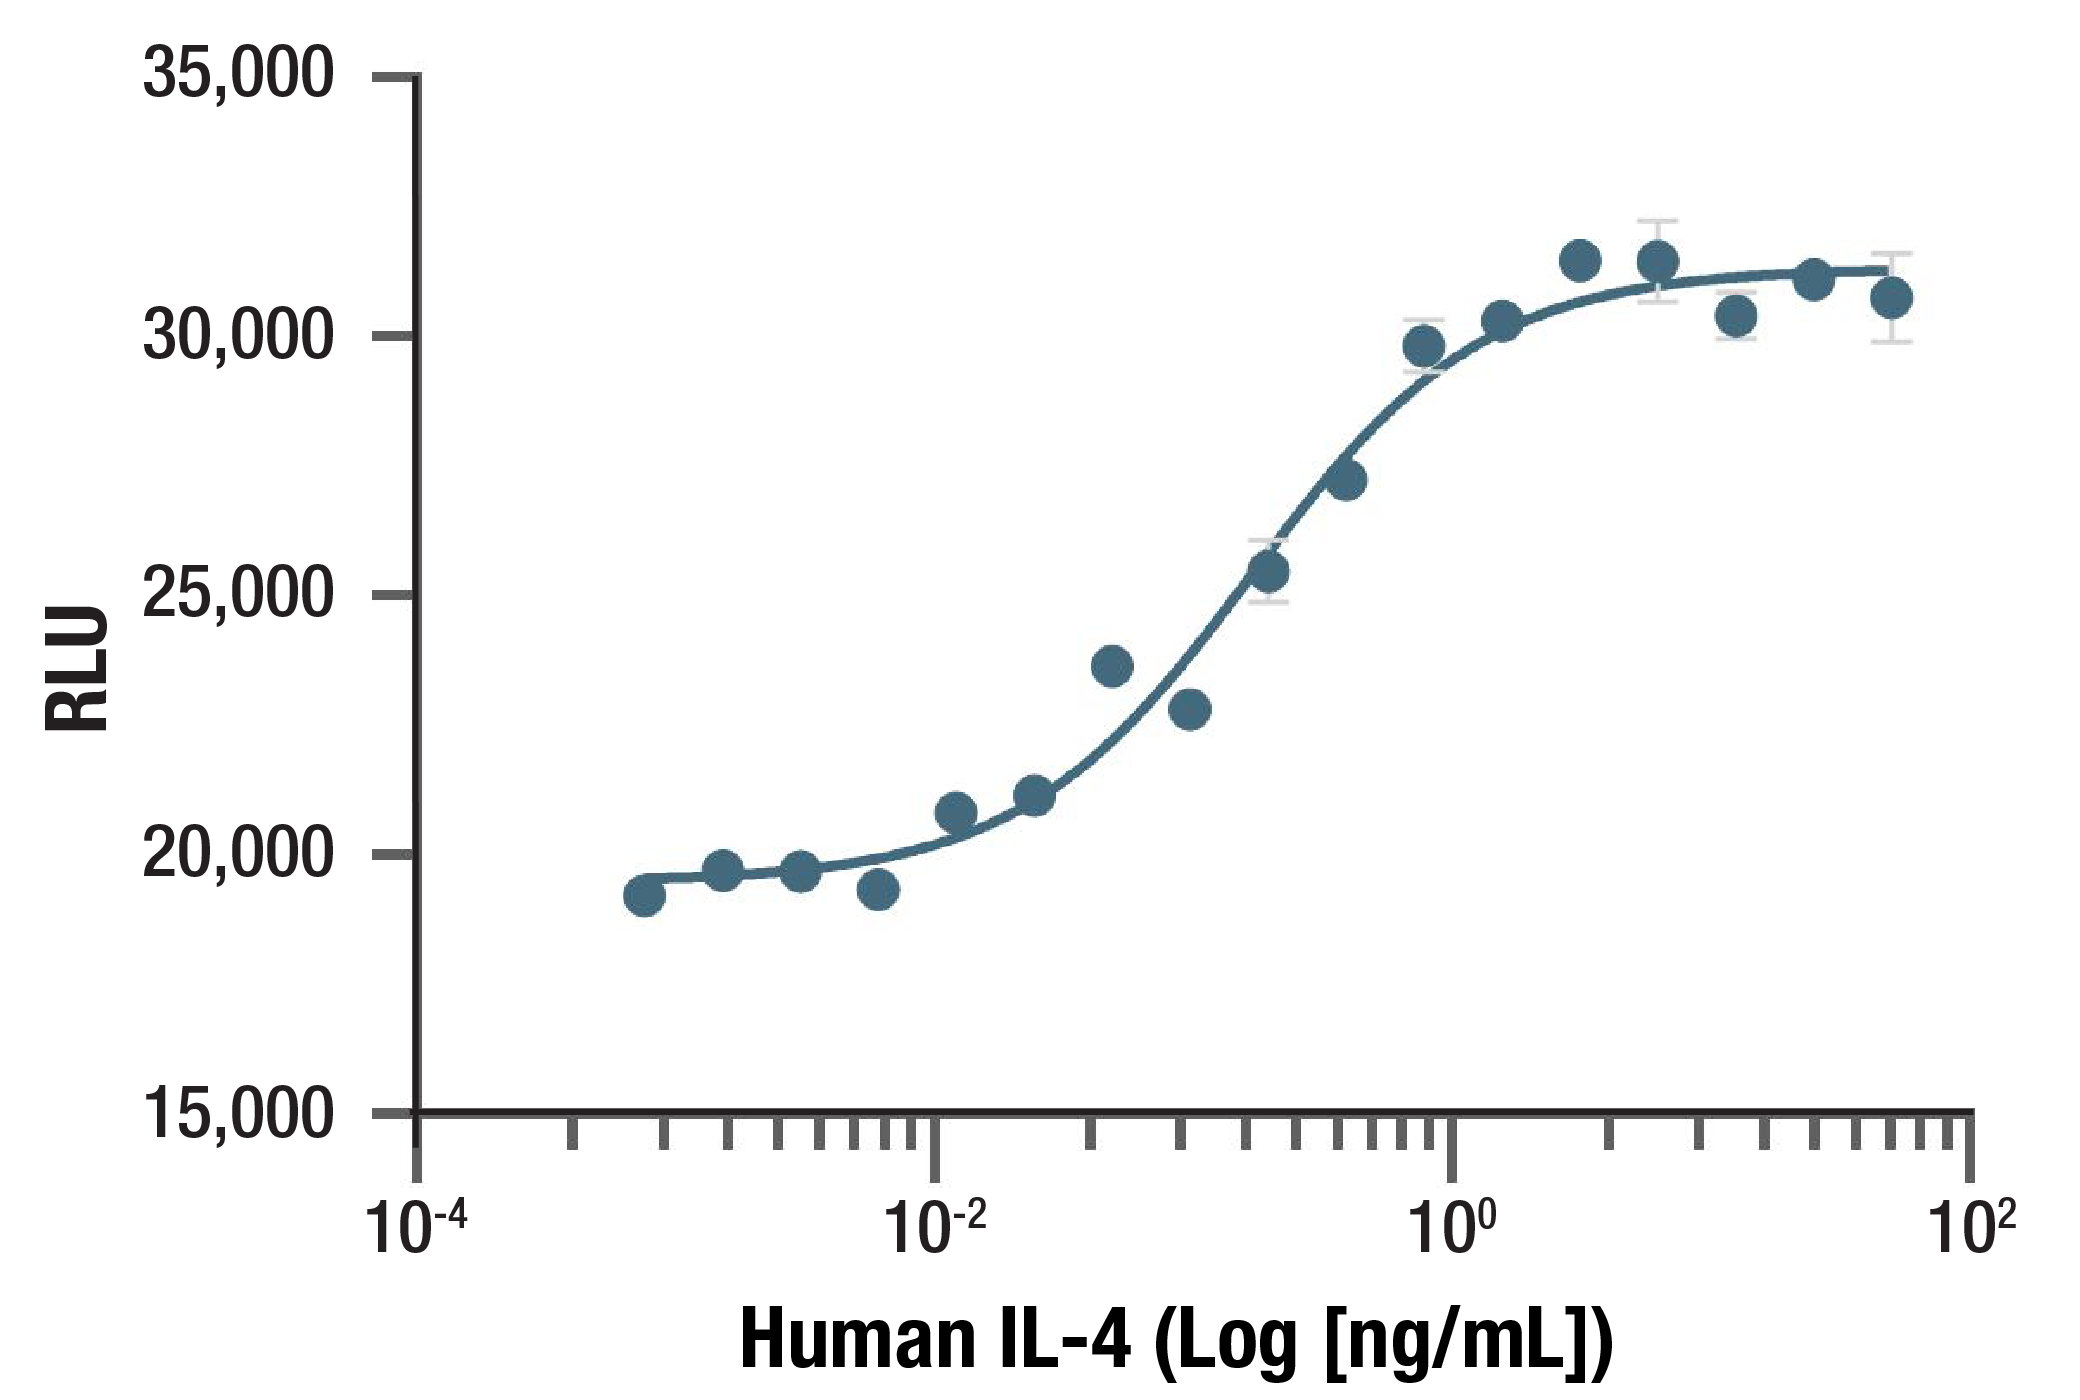  Image 1: Human IL-4 Recombinant Protein